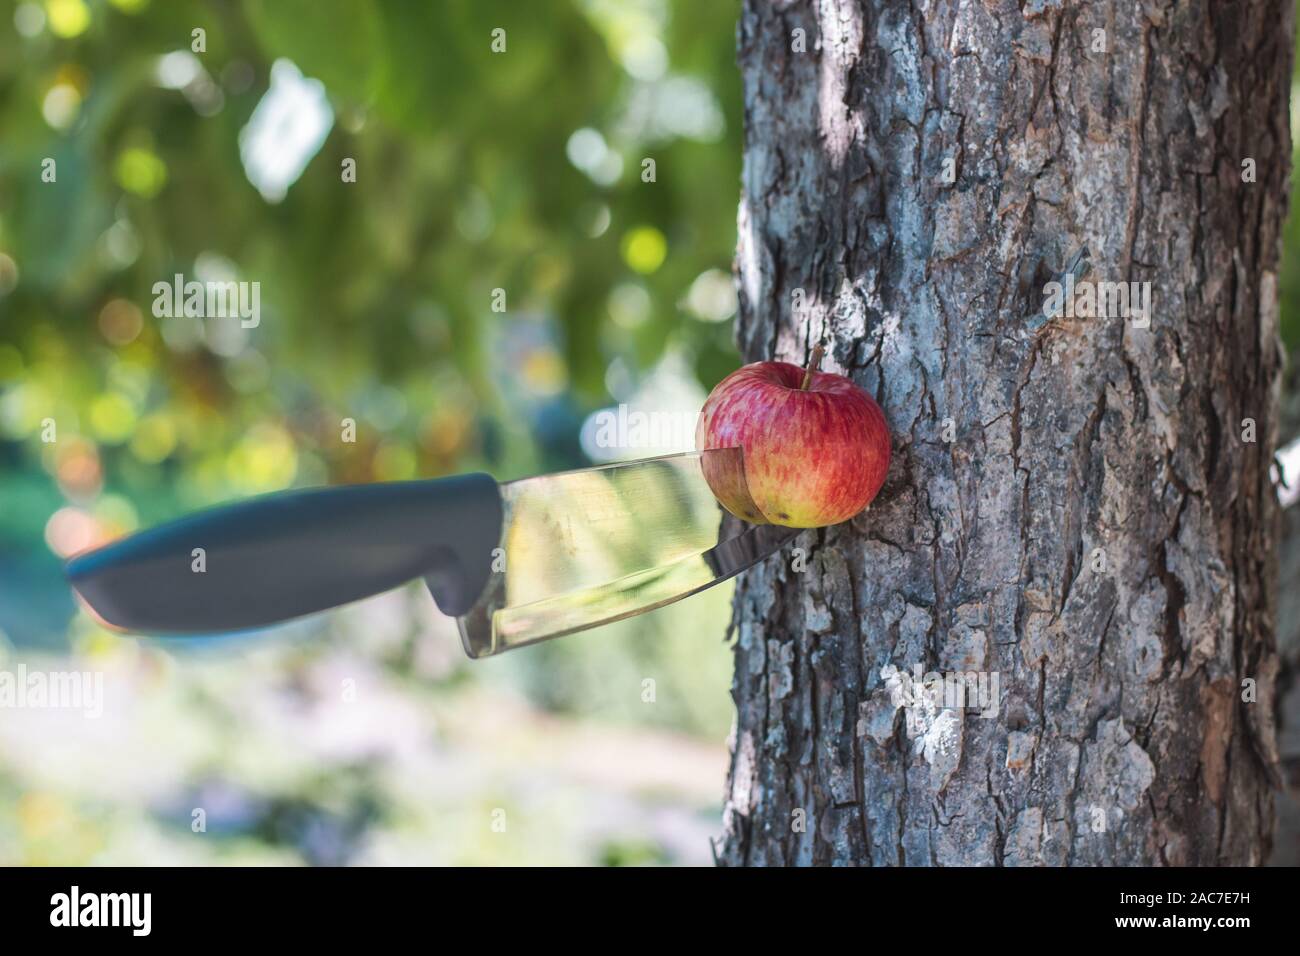 Steel arms. Throwing a knife. The knife stuck in the bark of a tree. The knife hit the target Stock Photo